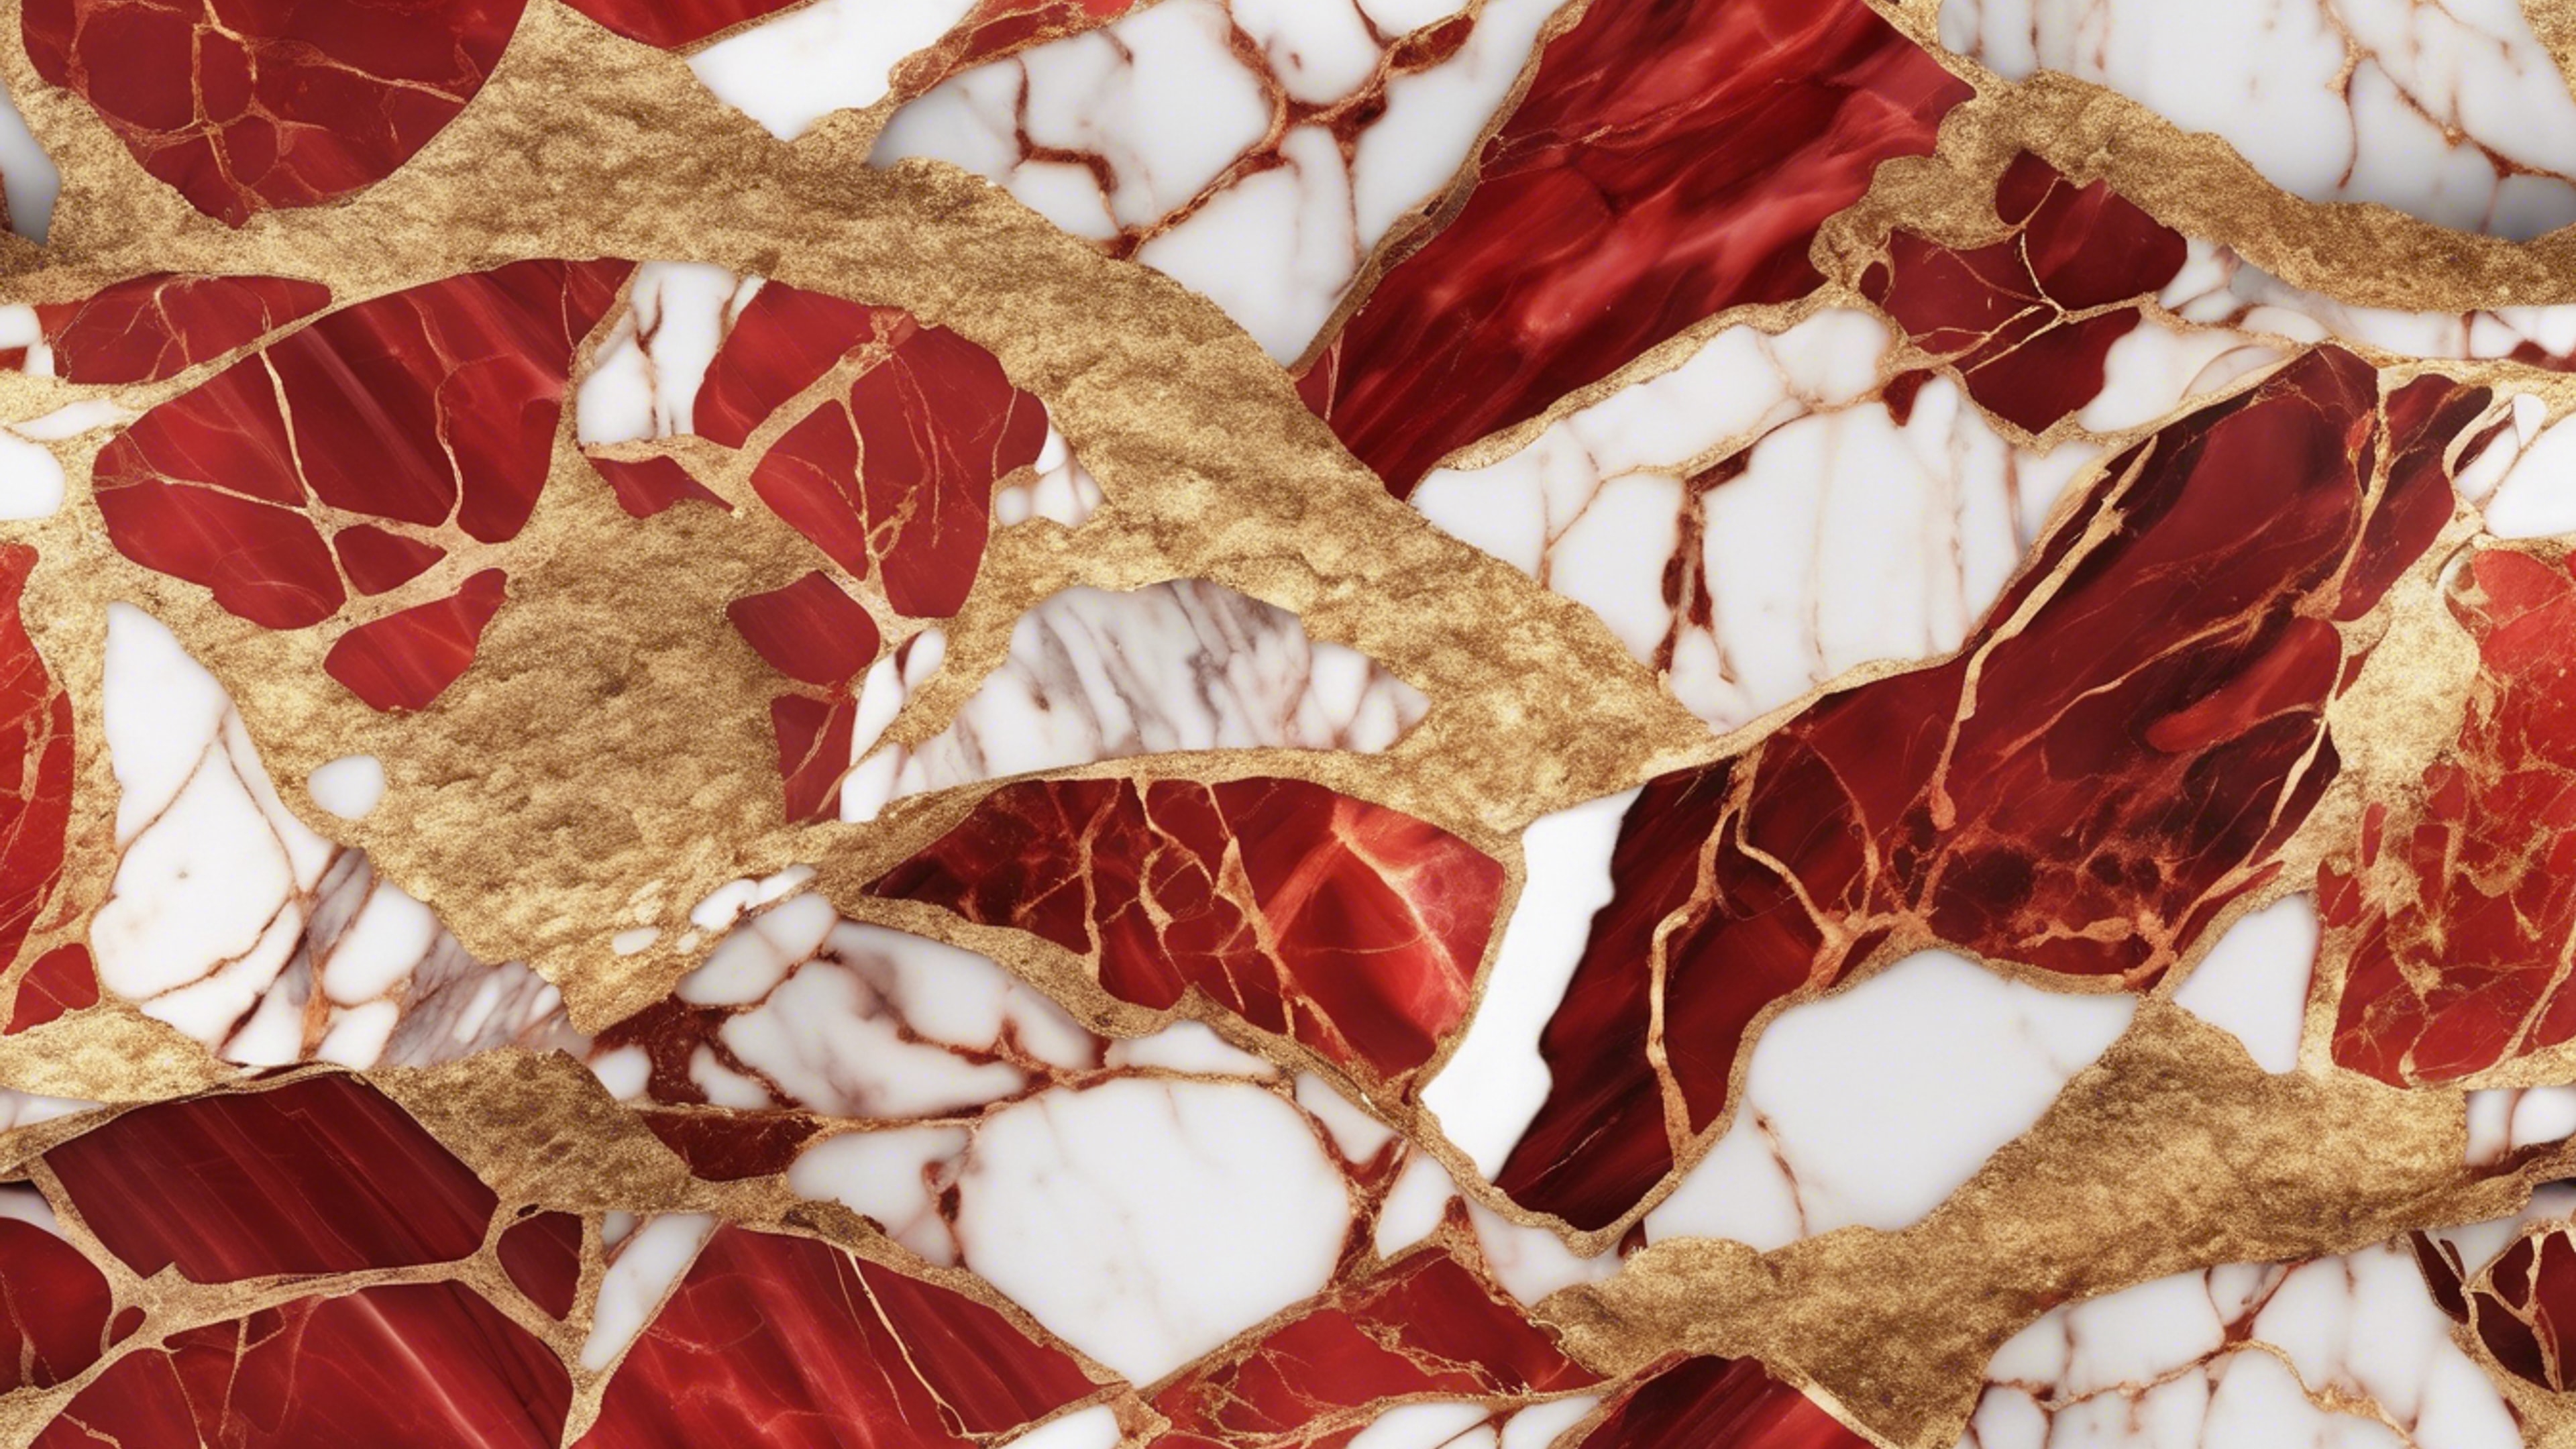 Seamless pattern of red and gold marble set that reflects an elegant aesthetic. Валлпапер[f027cacdf9b04c65aa51]